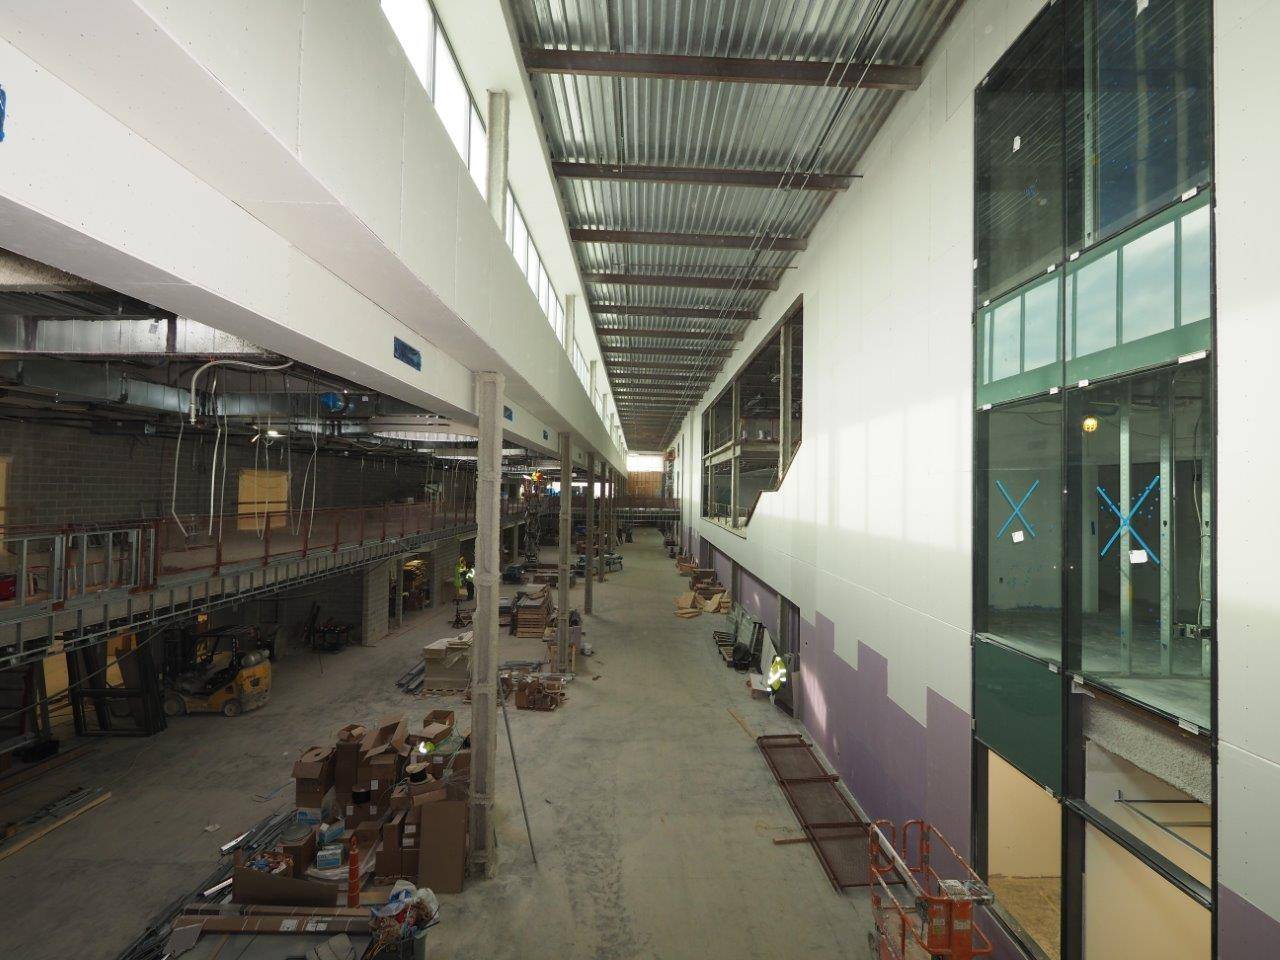 A view down the main boulevard in the new high school